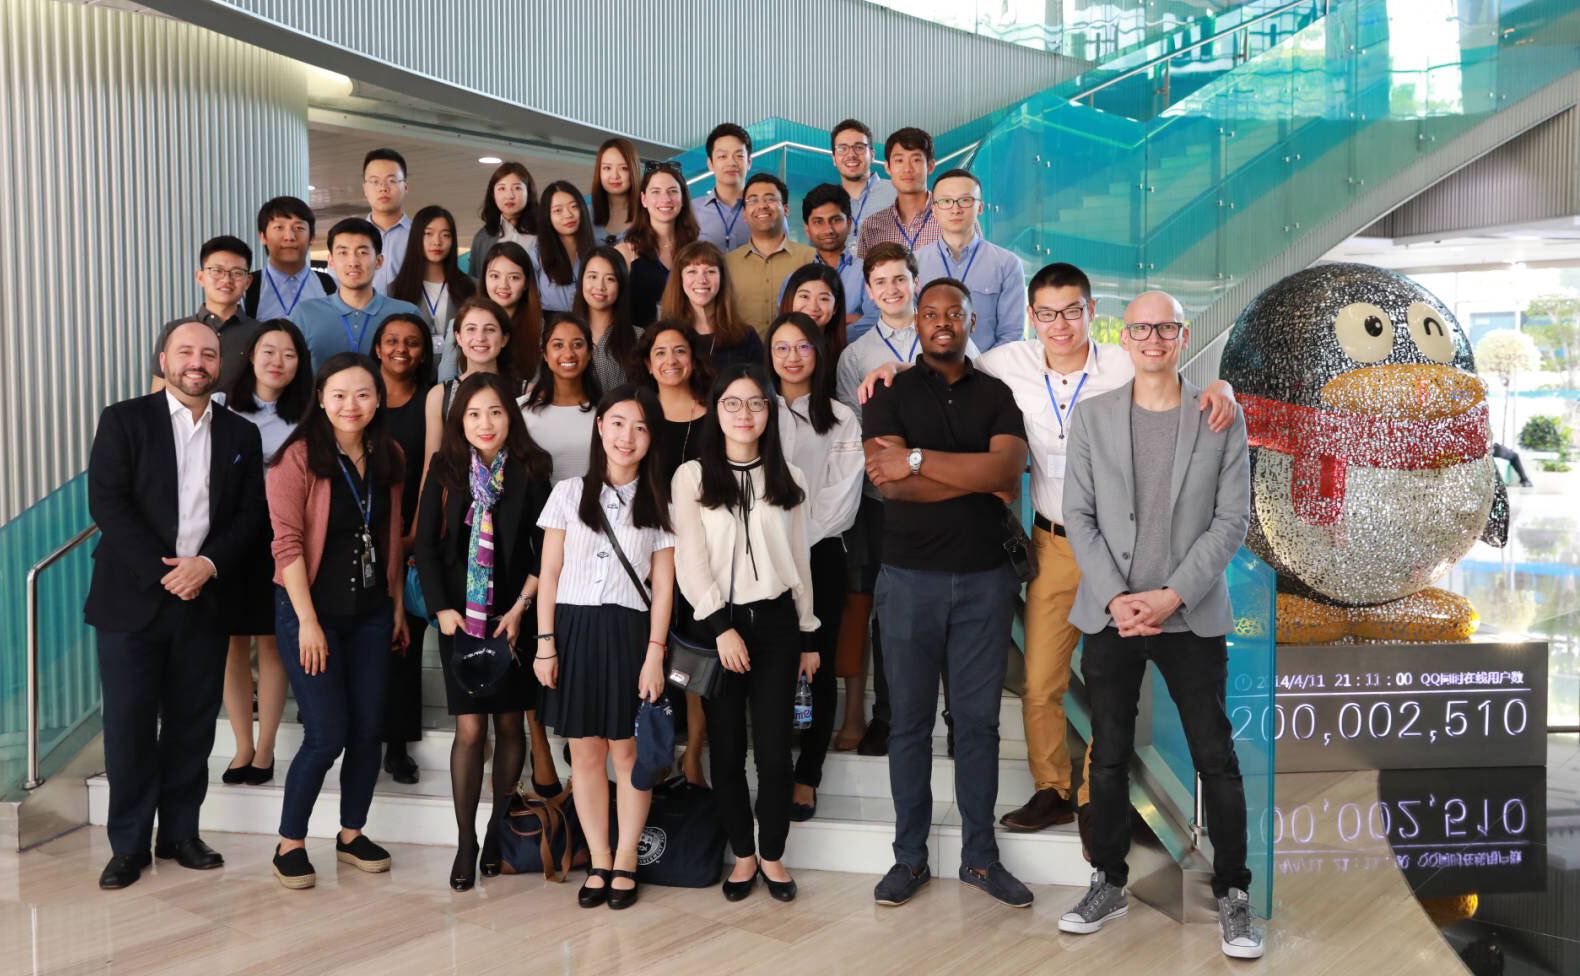 The fellows at Tencent headquarters.